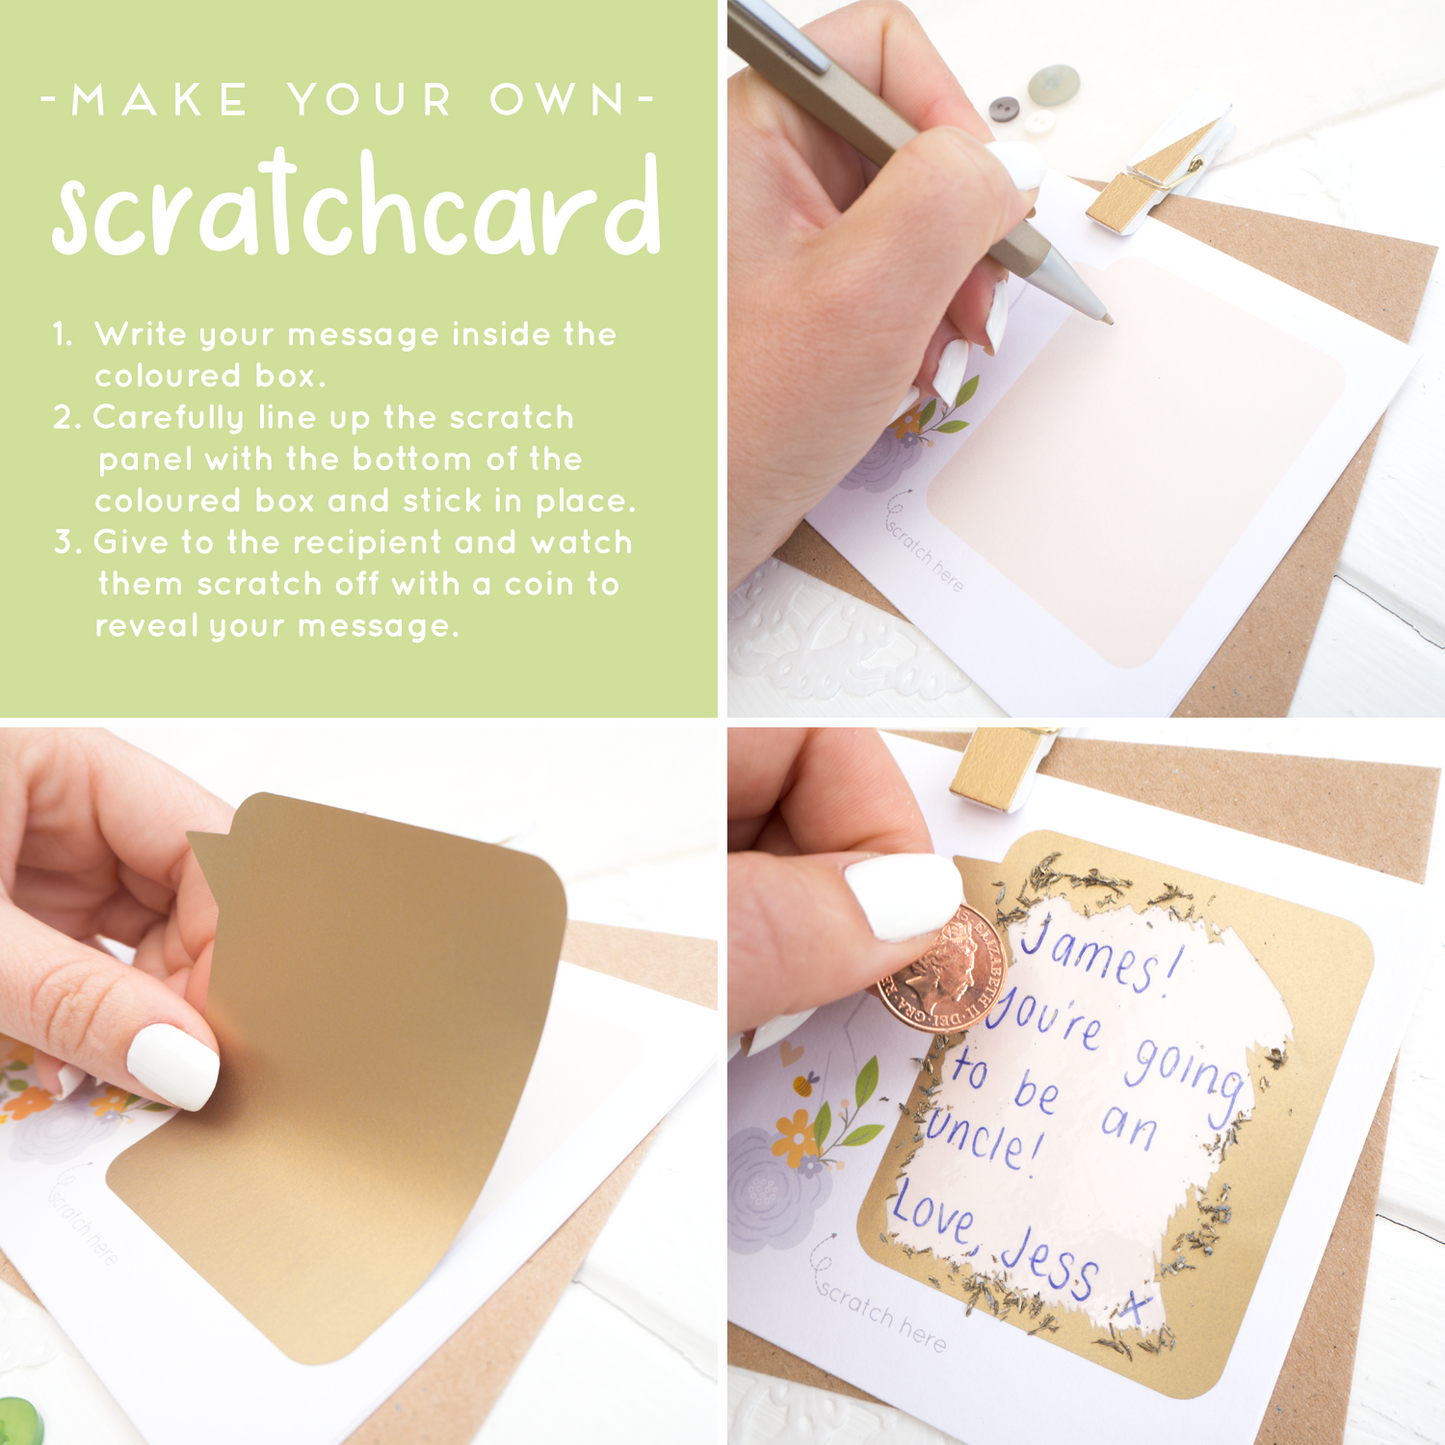 How to make your scratch card in 3 easy steps.